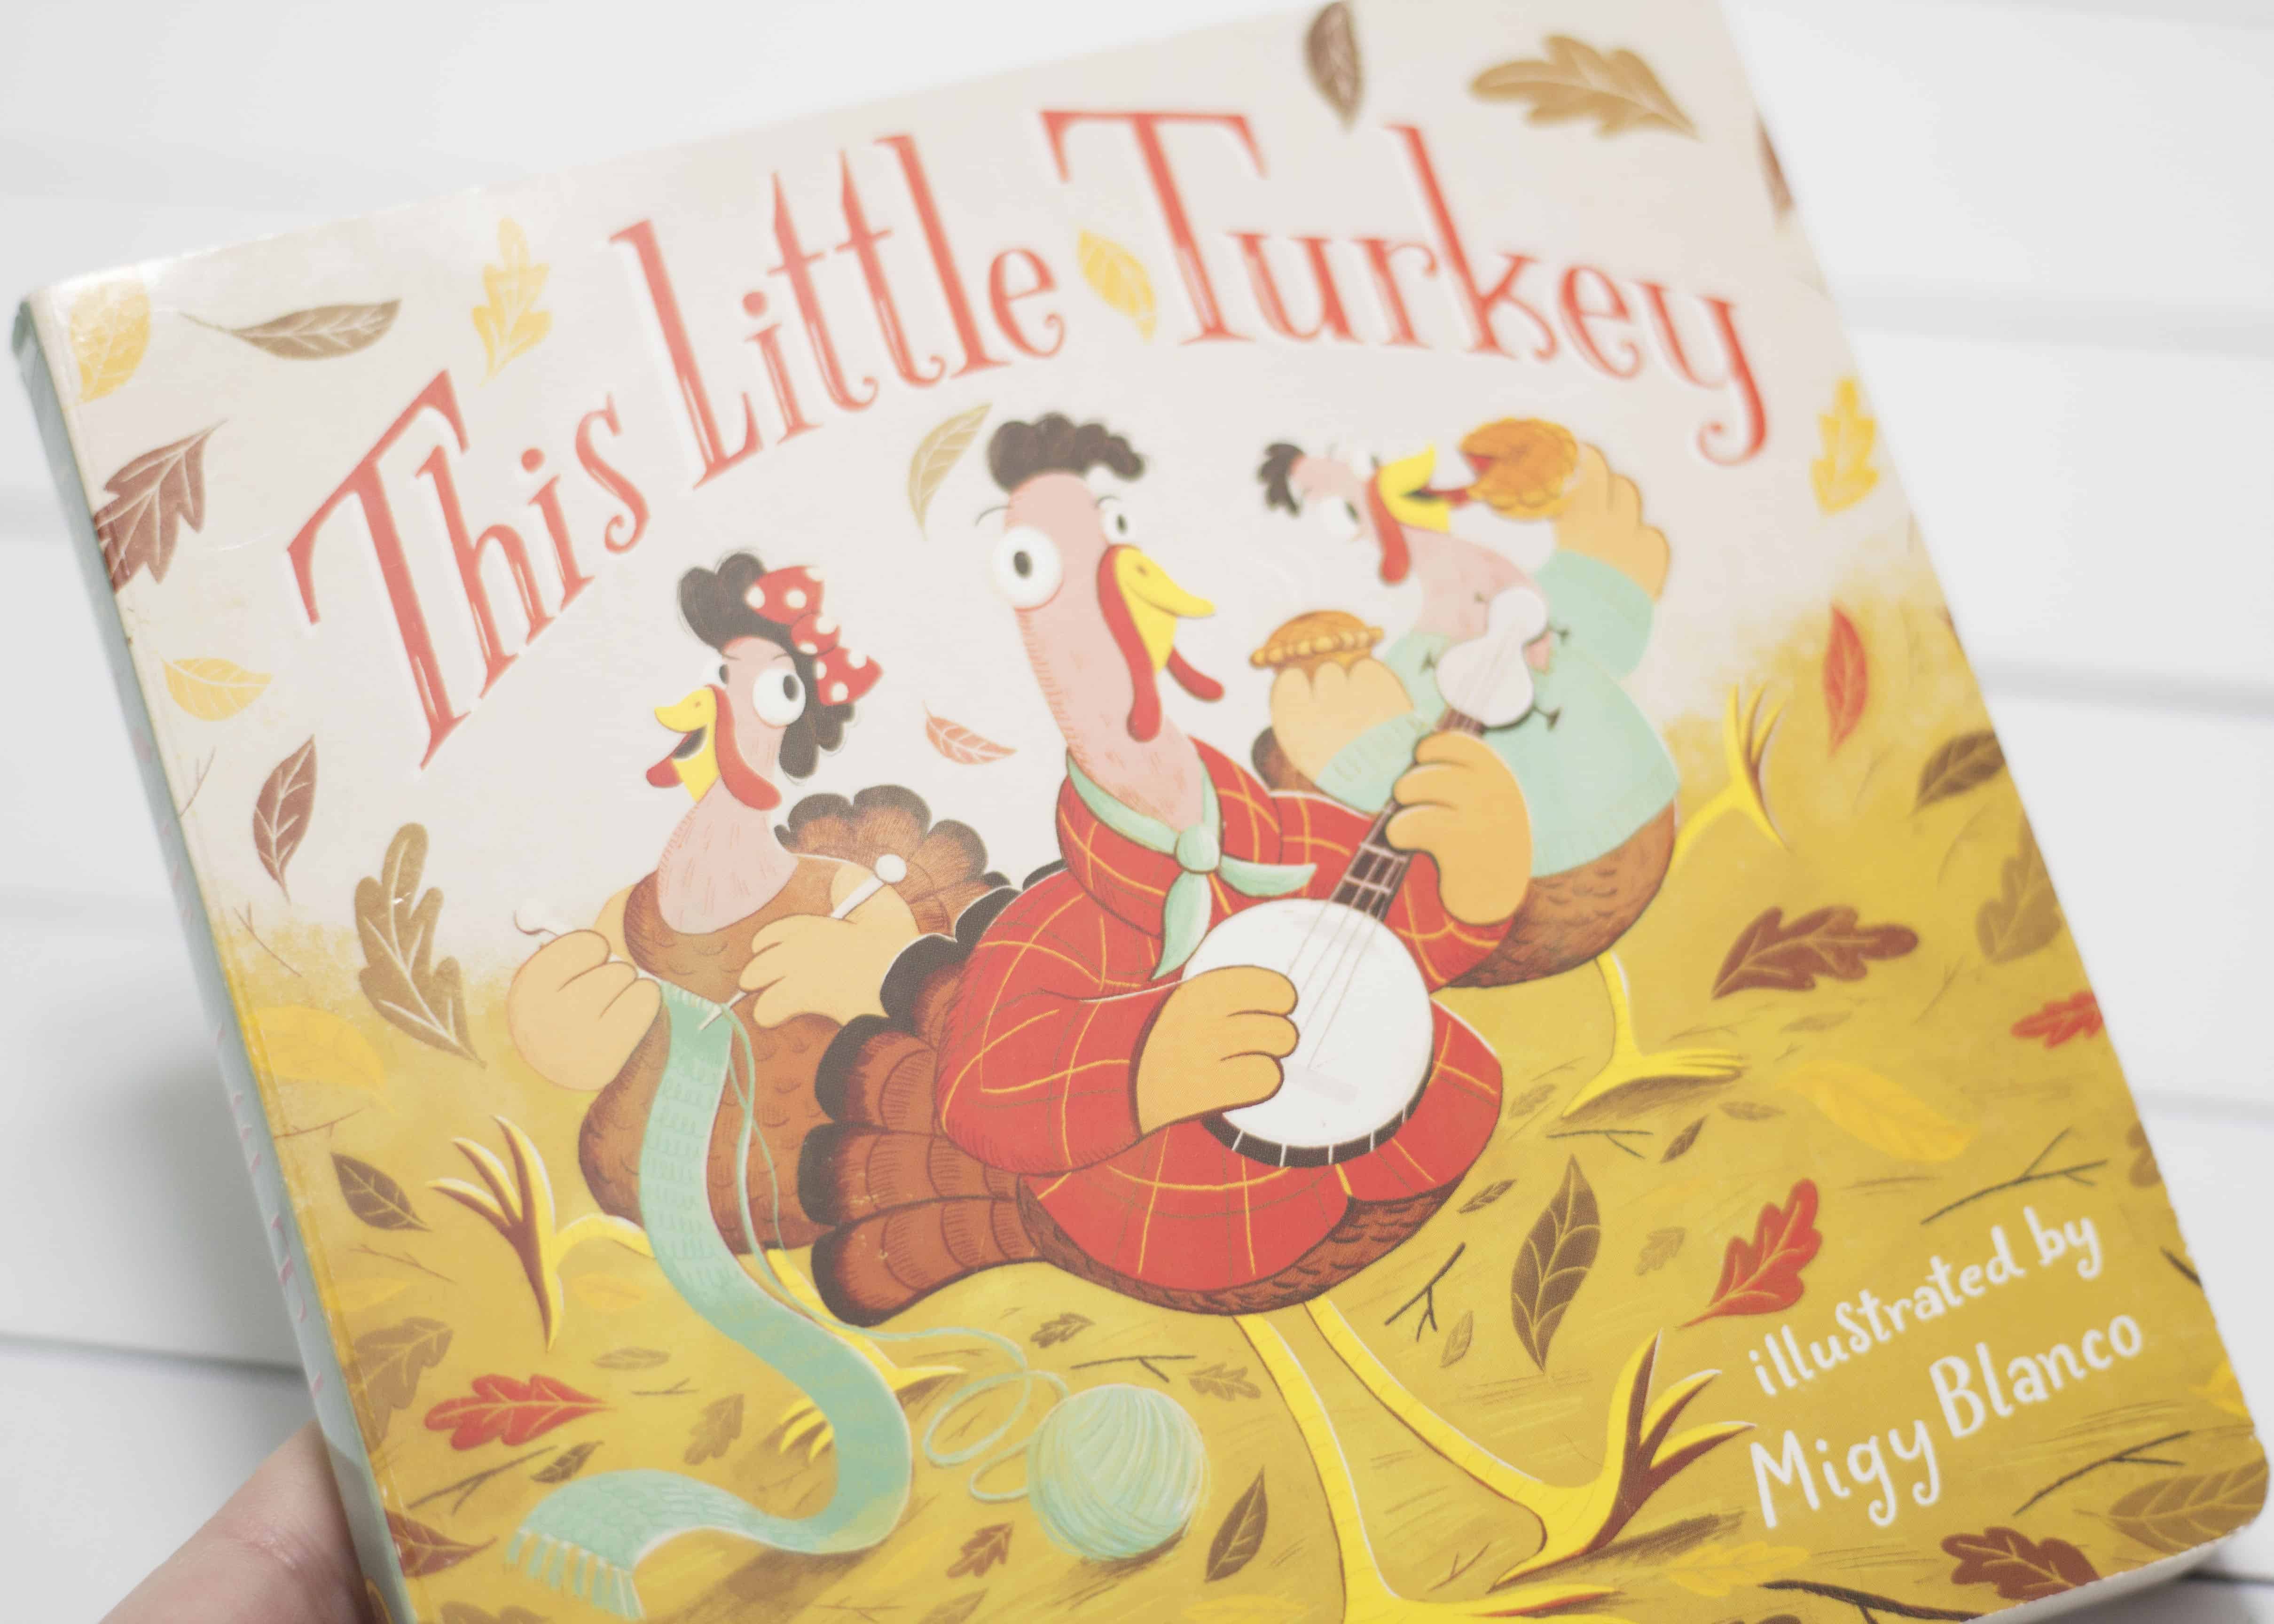 THIS LITTLE TURKEY PICTURE BOOK